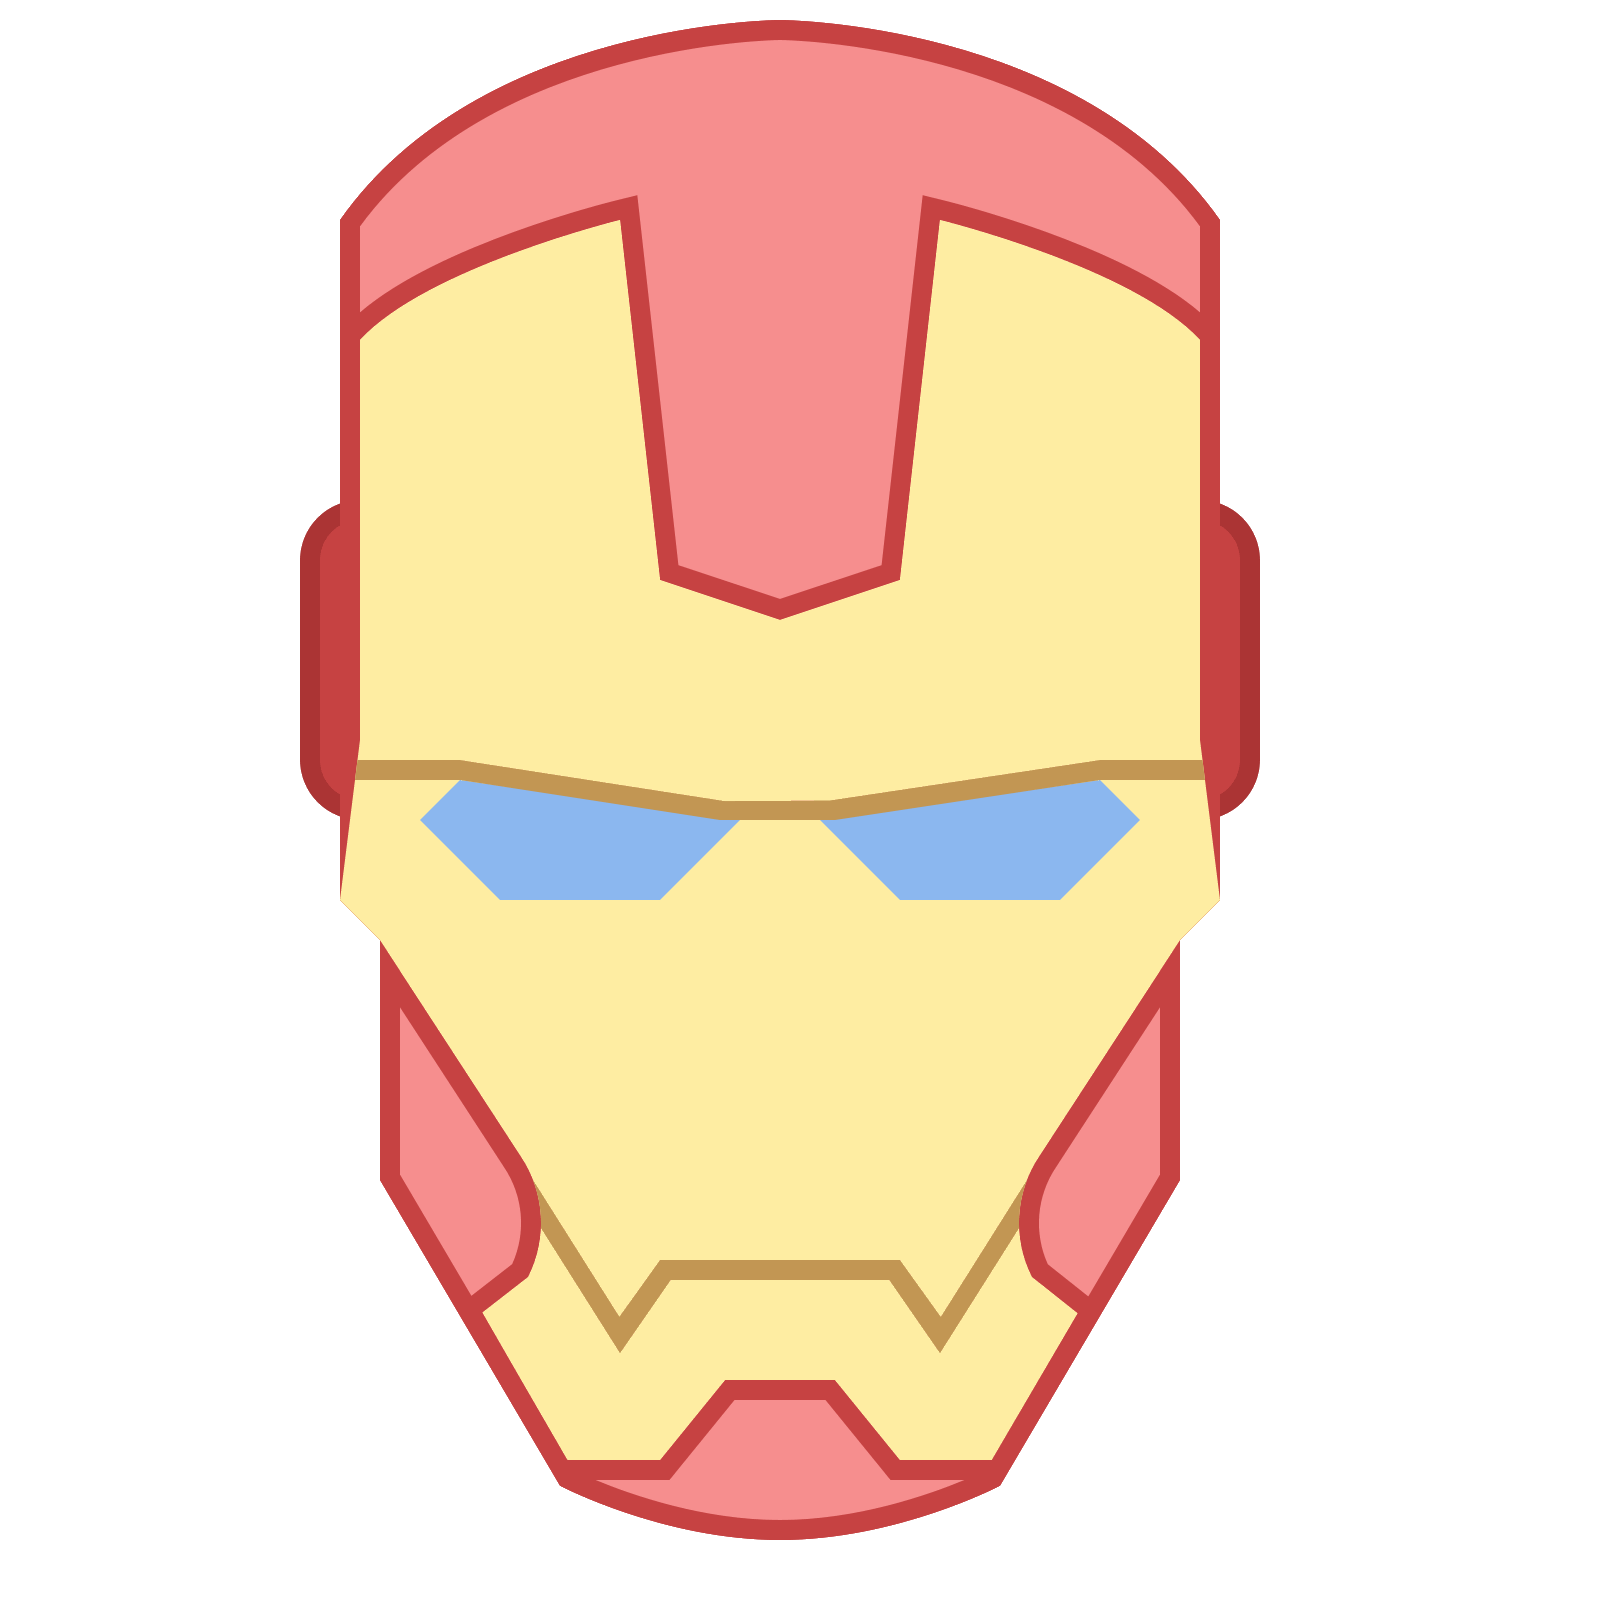 Download Ironman clipart head, Ironman head Transparent FREE for download on WebStockReview 2021